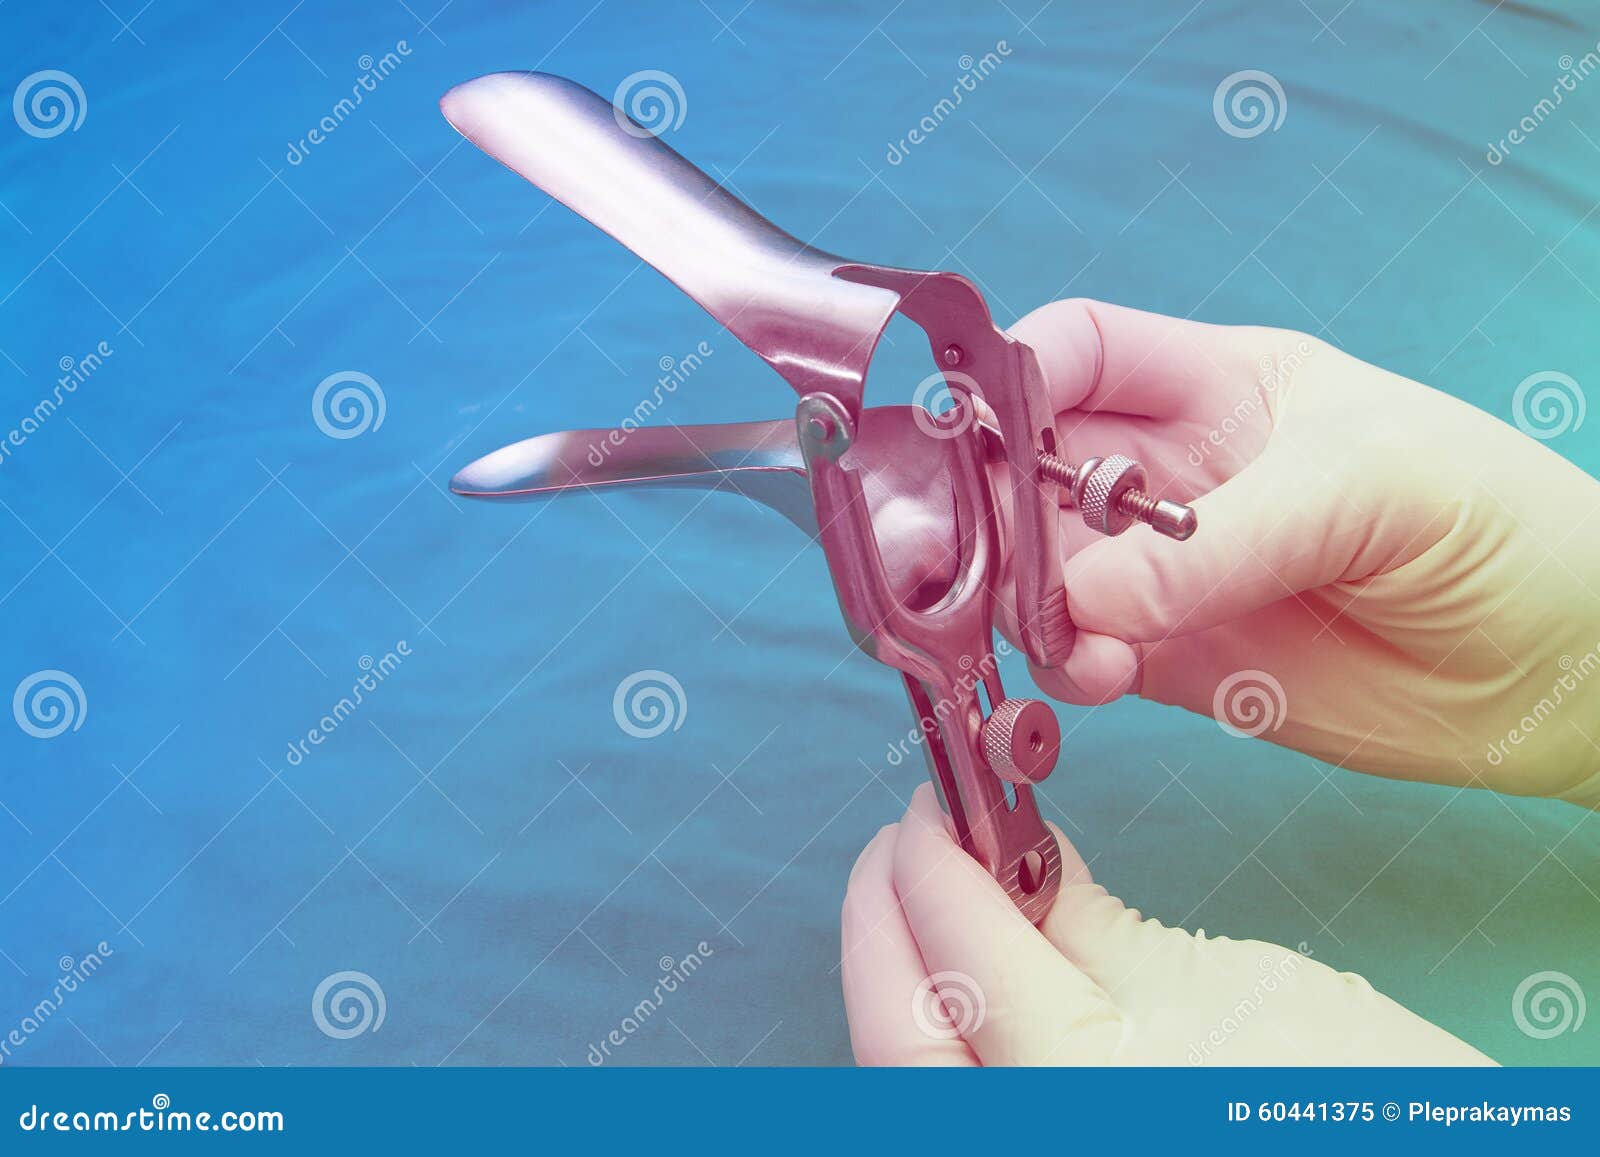 doctor holds a disposable speculum